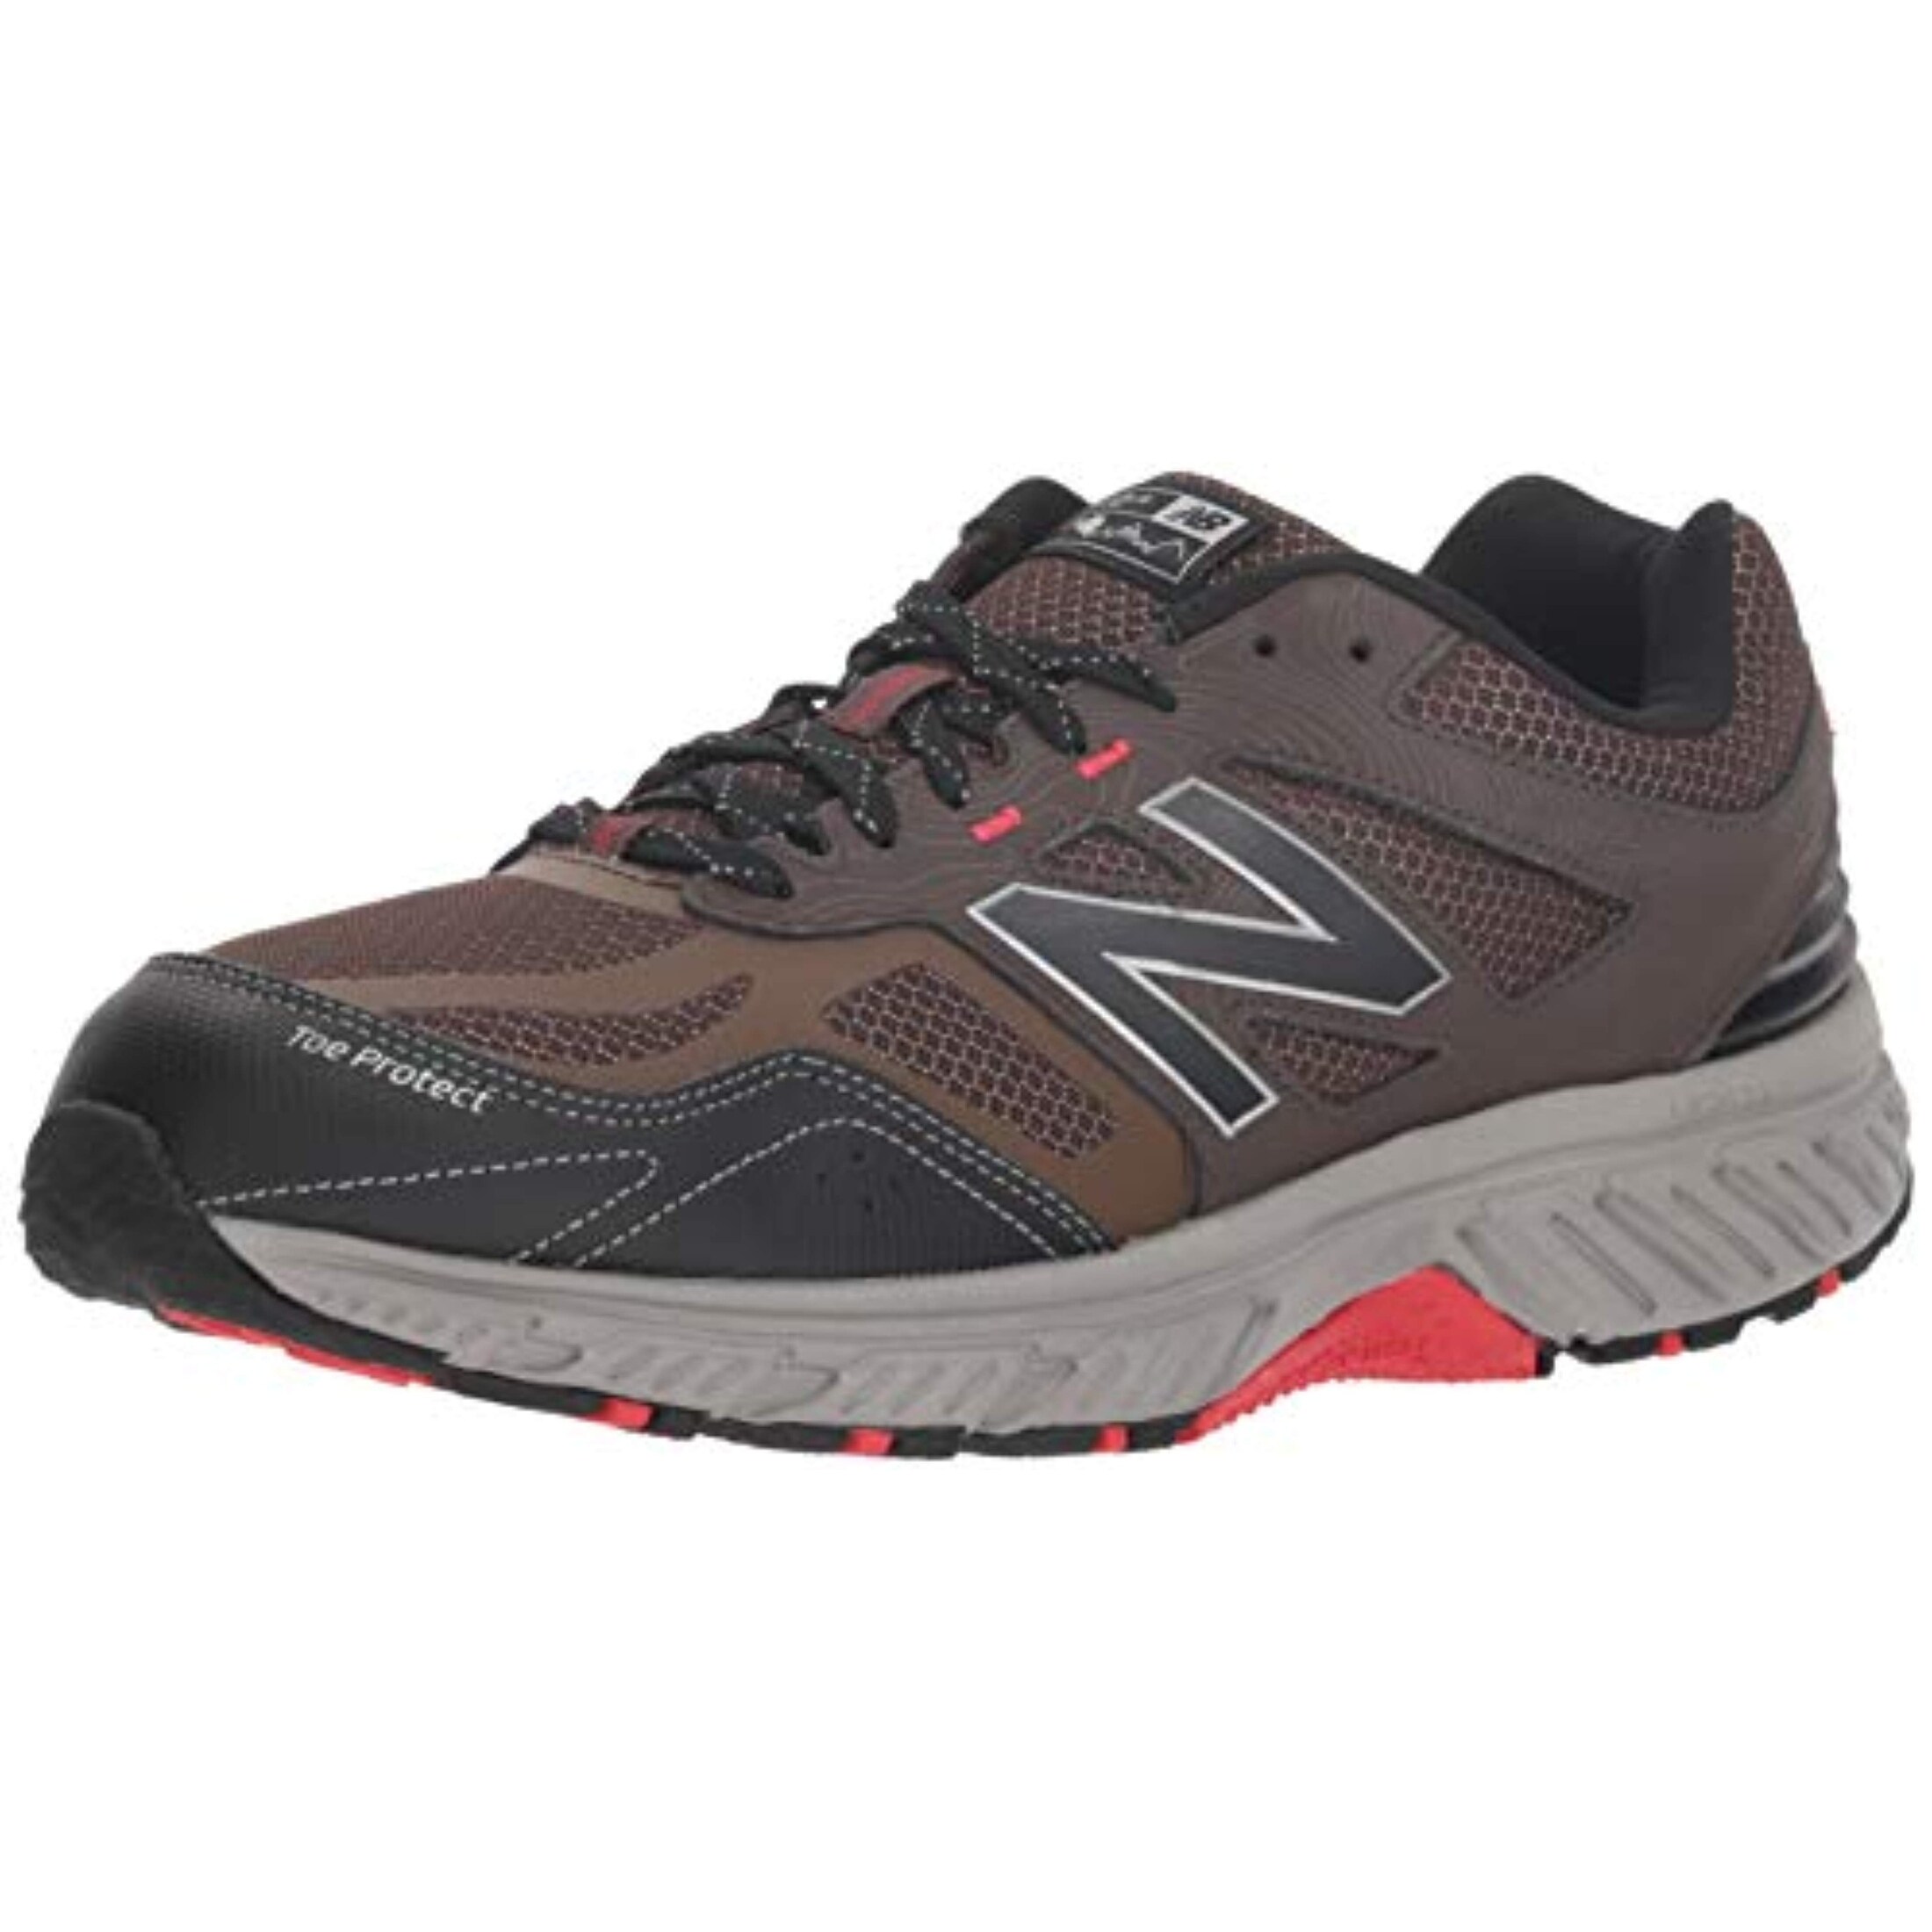 510v4 new balance, OFF 78%,Free delivery!